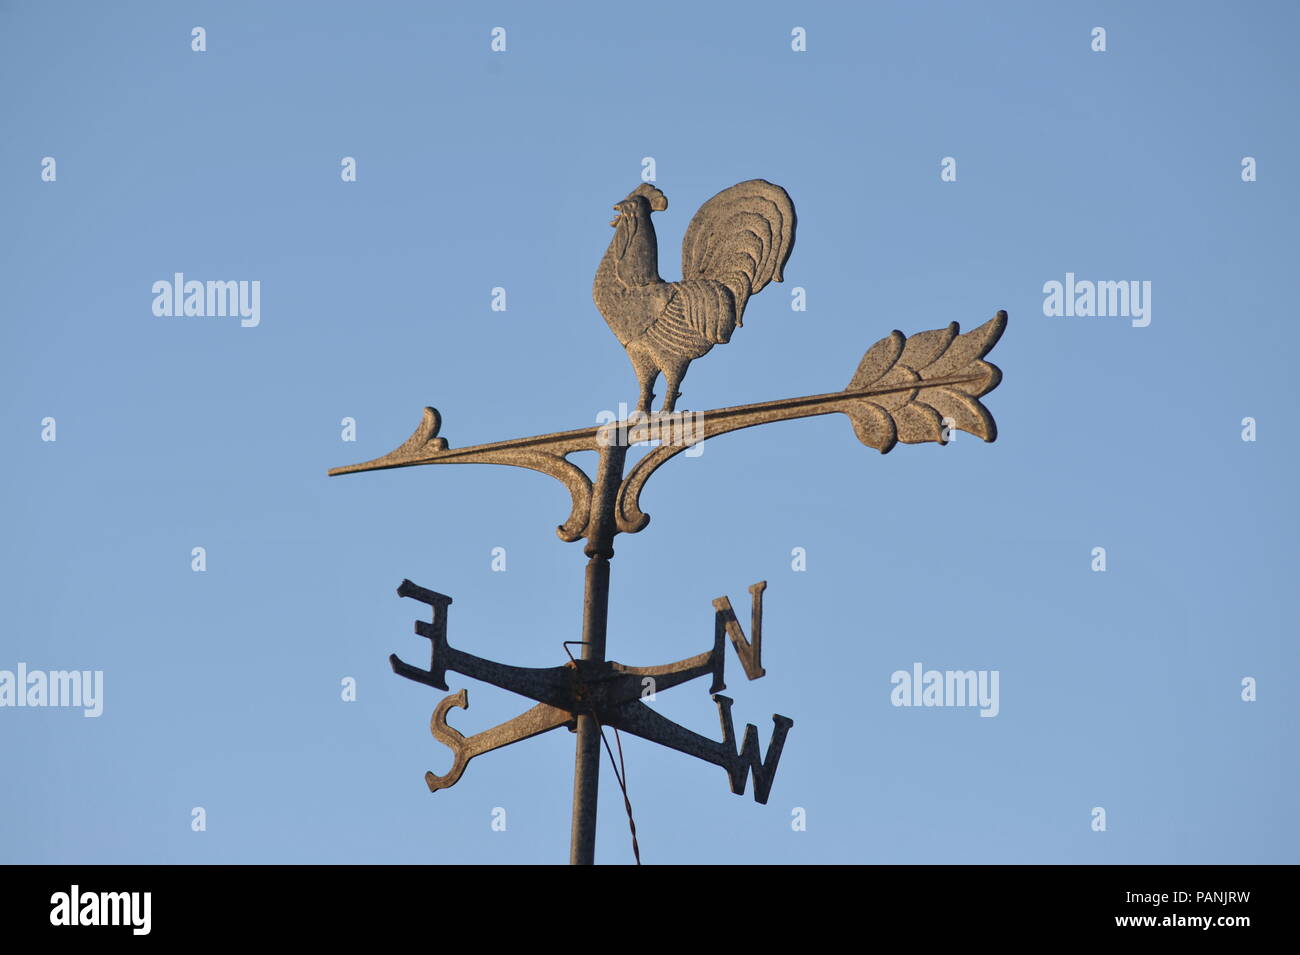 Directional weather vane in the form of a rooster marking north, south, east and west, with arrow with feathers, atop which the rooster stands, USA. Stock Photo